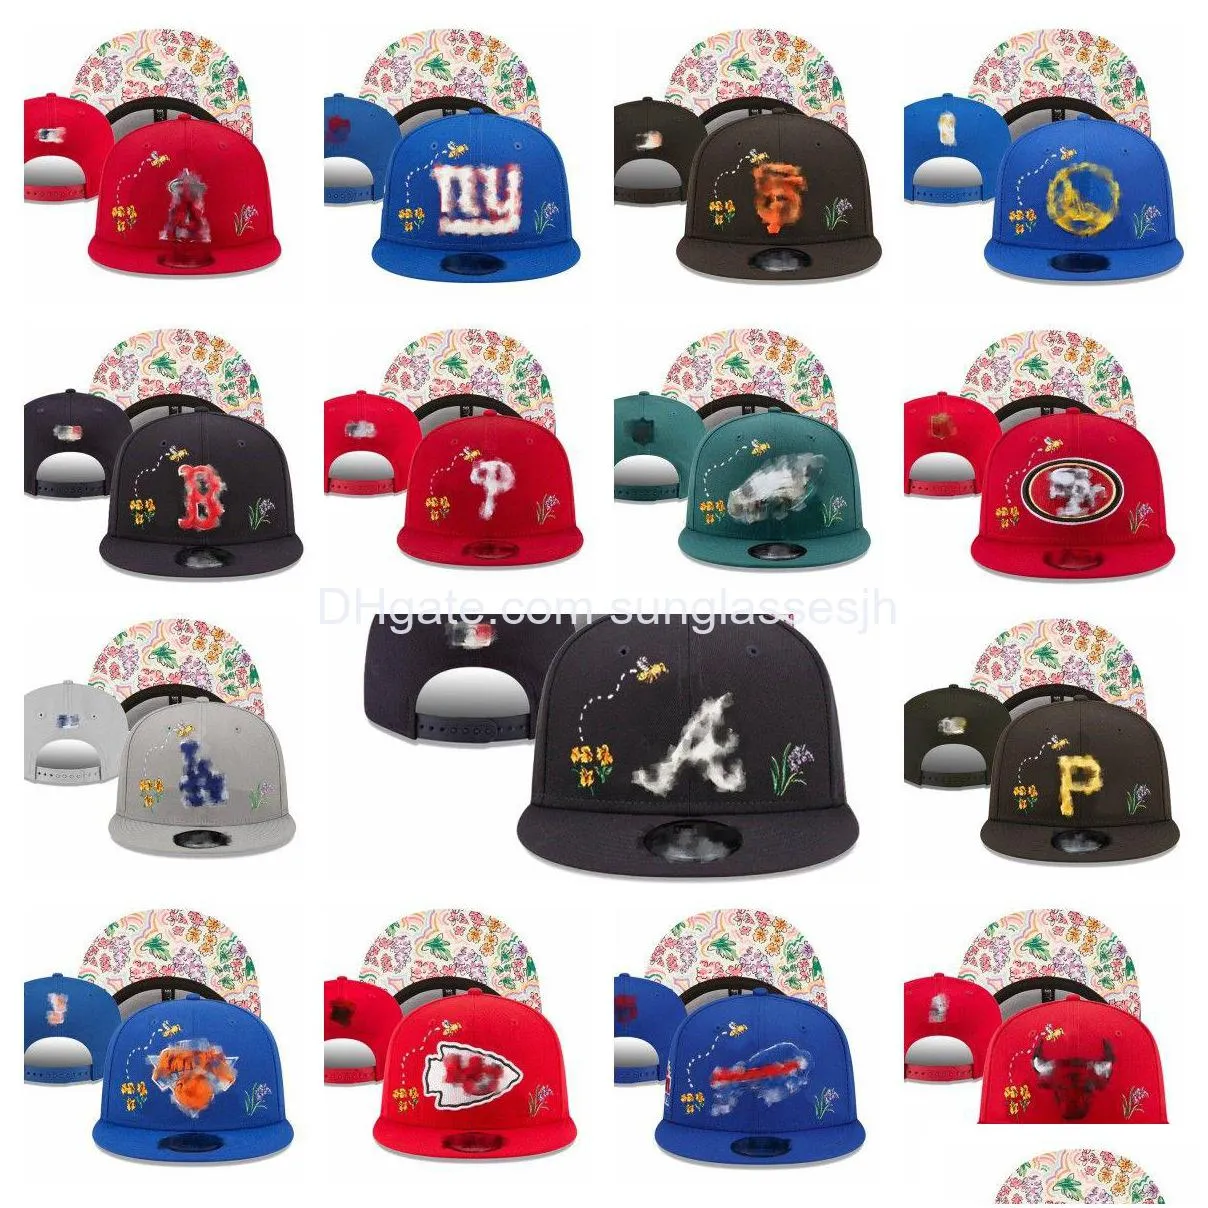 Ball Caps Embroidery Snapbacks Hats All Teams Logo Est Designer Sports Adt Hockey Flex Mesh Beanies Fitted Hat Cotton Football Hip H Dhkue